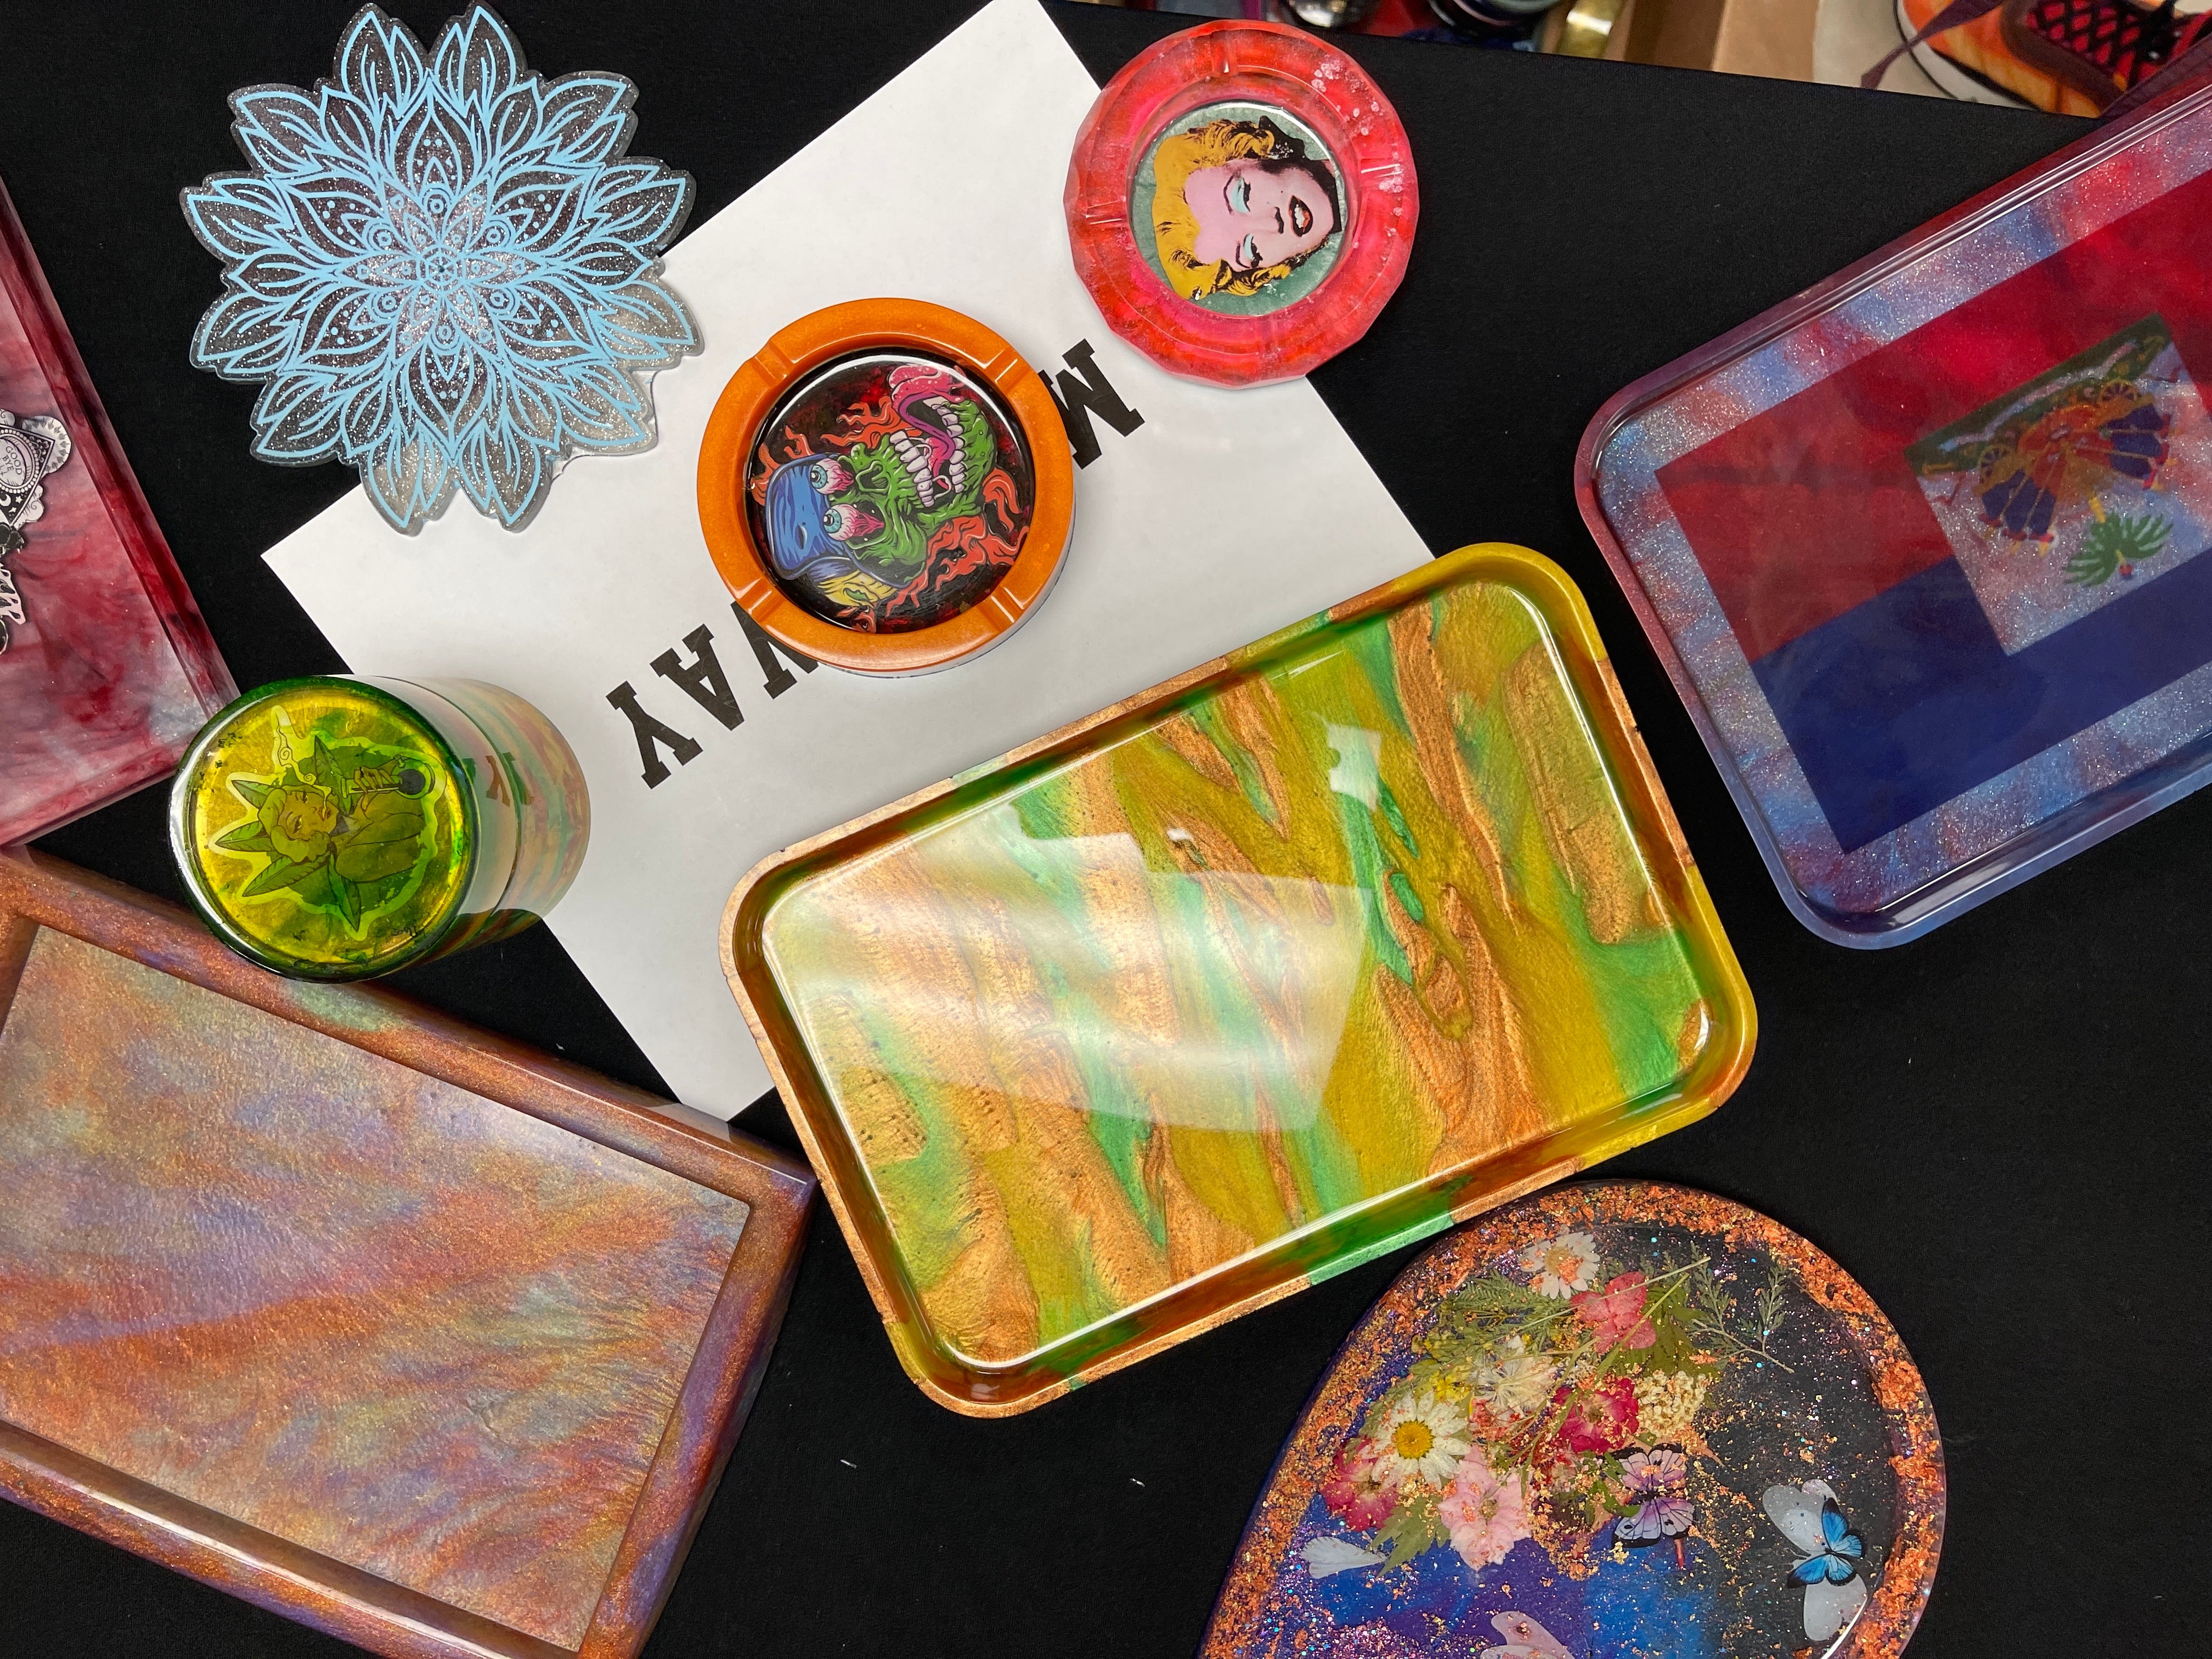 DIY epoxy resin crafts, such as epoxy ashtrays, spread out on a table.